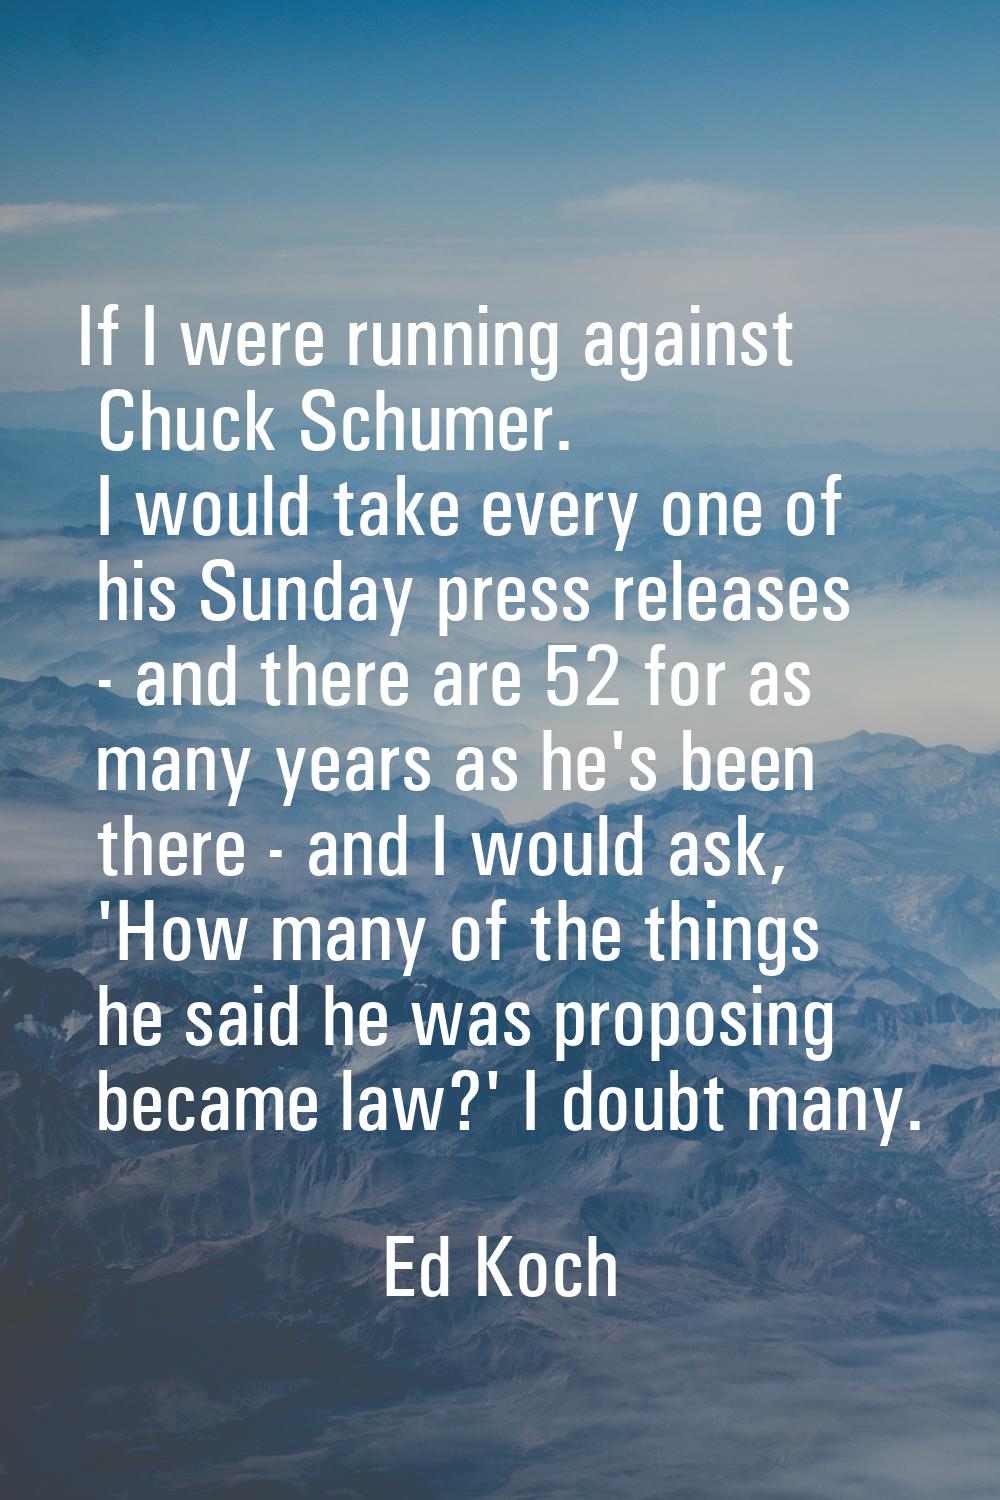 If I were running against Chuck Schumer. I would take every one of his Sunday press releases - and 